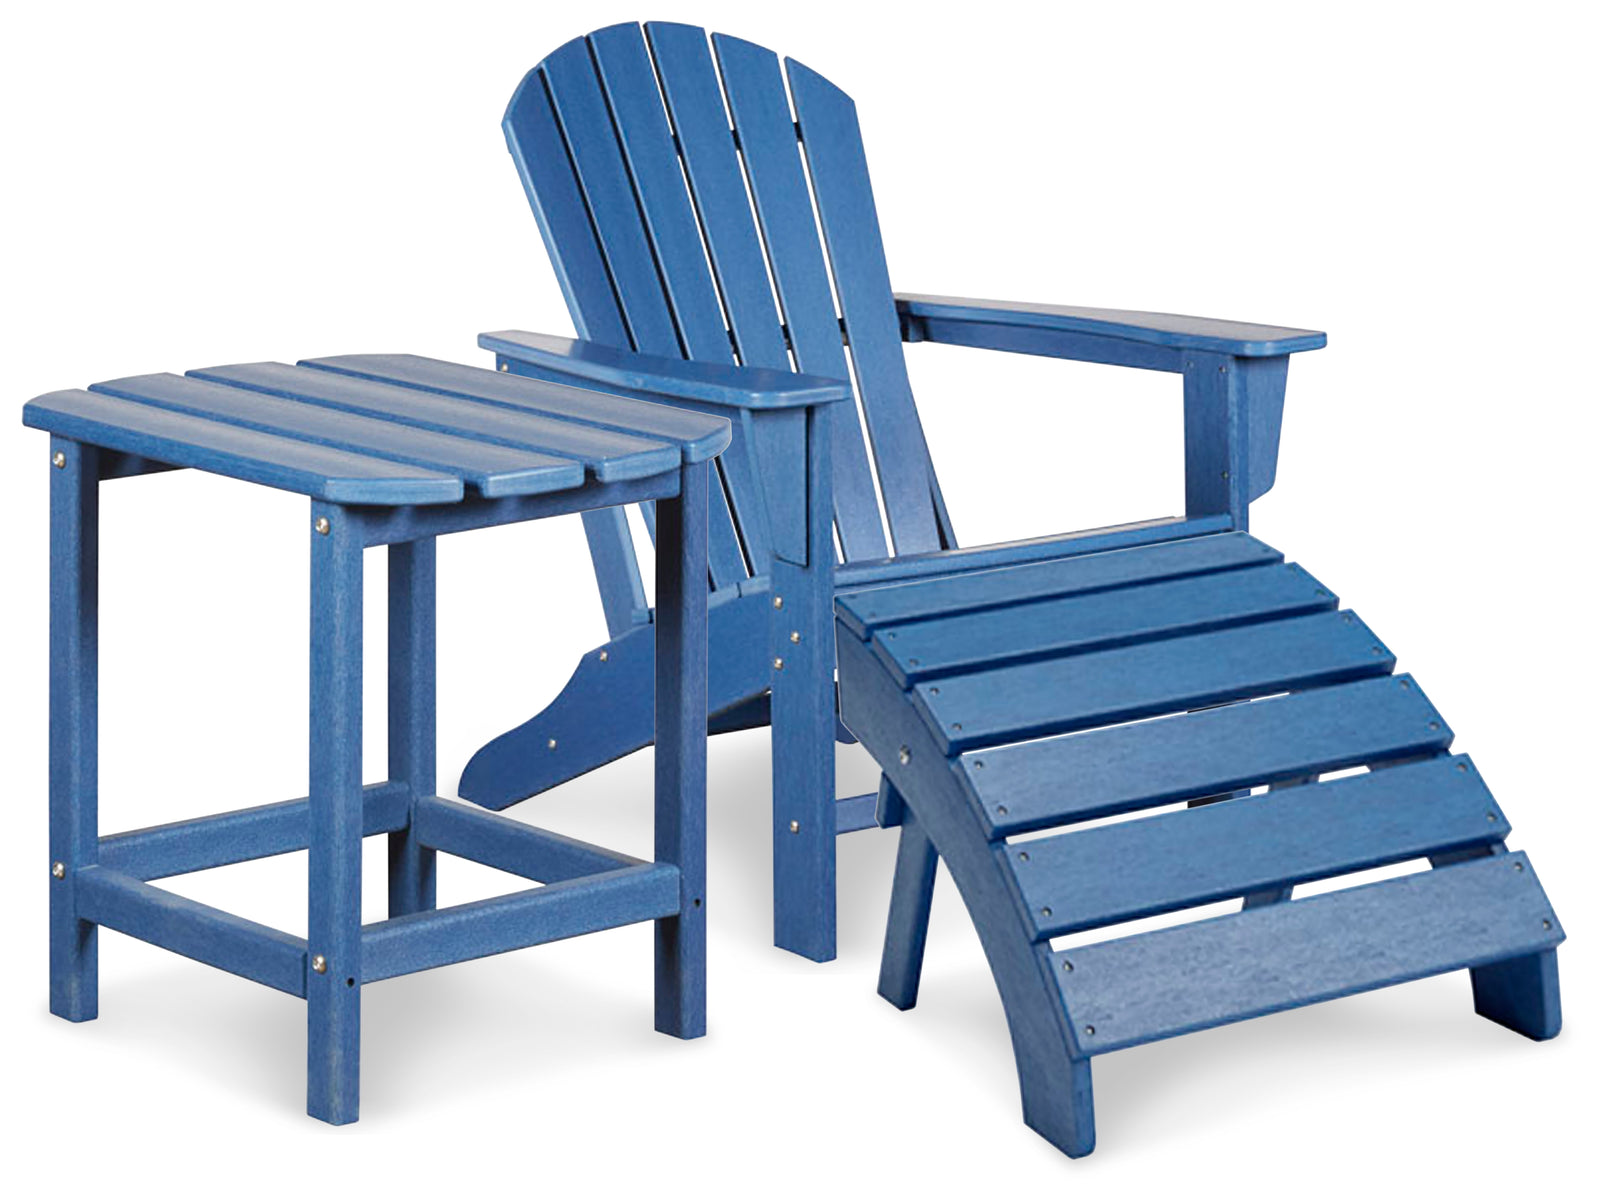 Sundown Blue Treasure Outdoor Adirondack Chair And Ottoman With Side Table